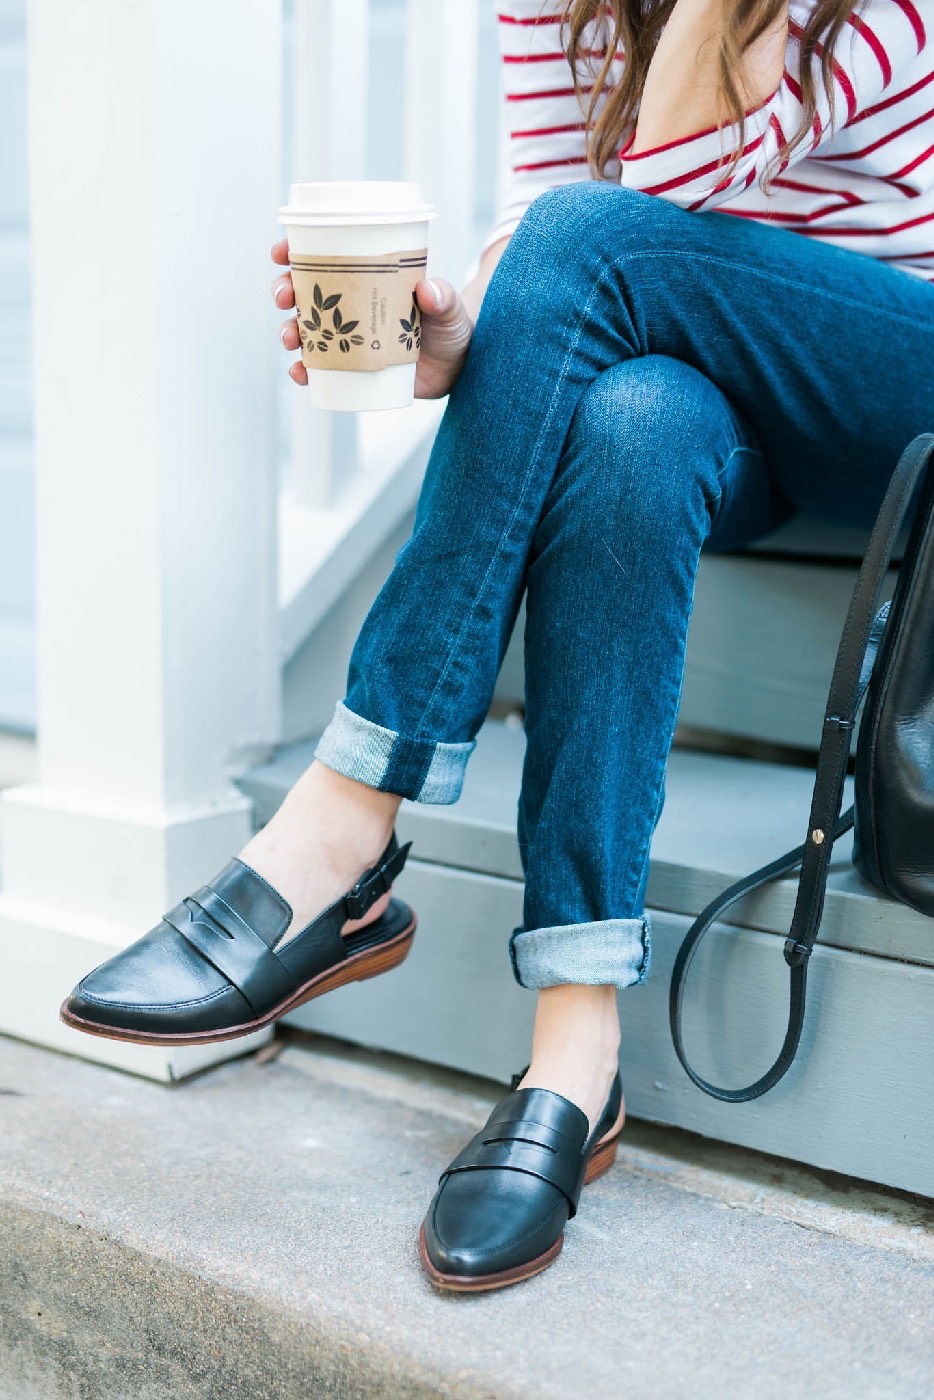 Wearing a pair of Kelsi Brooklyn Dagger black slip on loafers from Anthropologie with cuffed blue jeans.